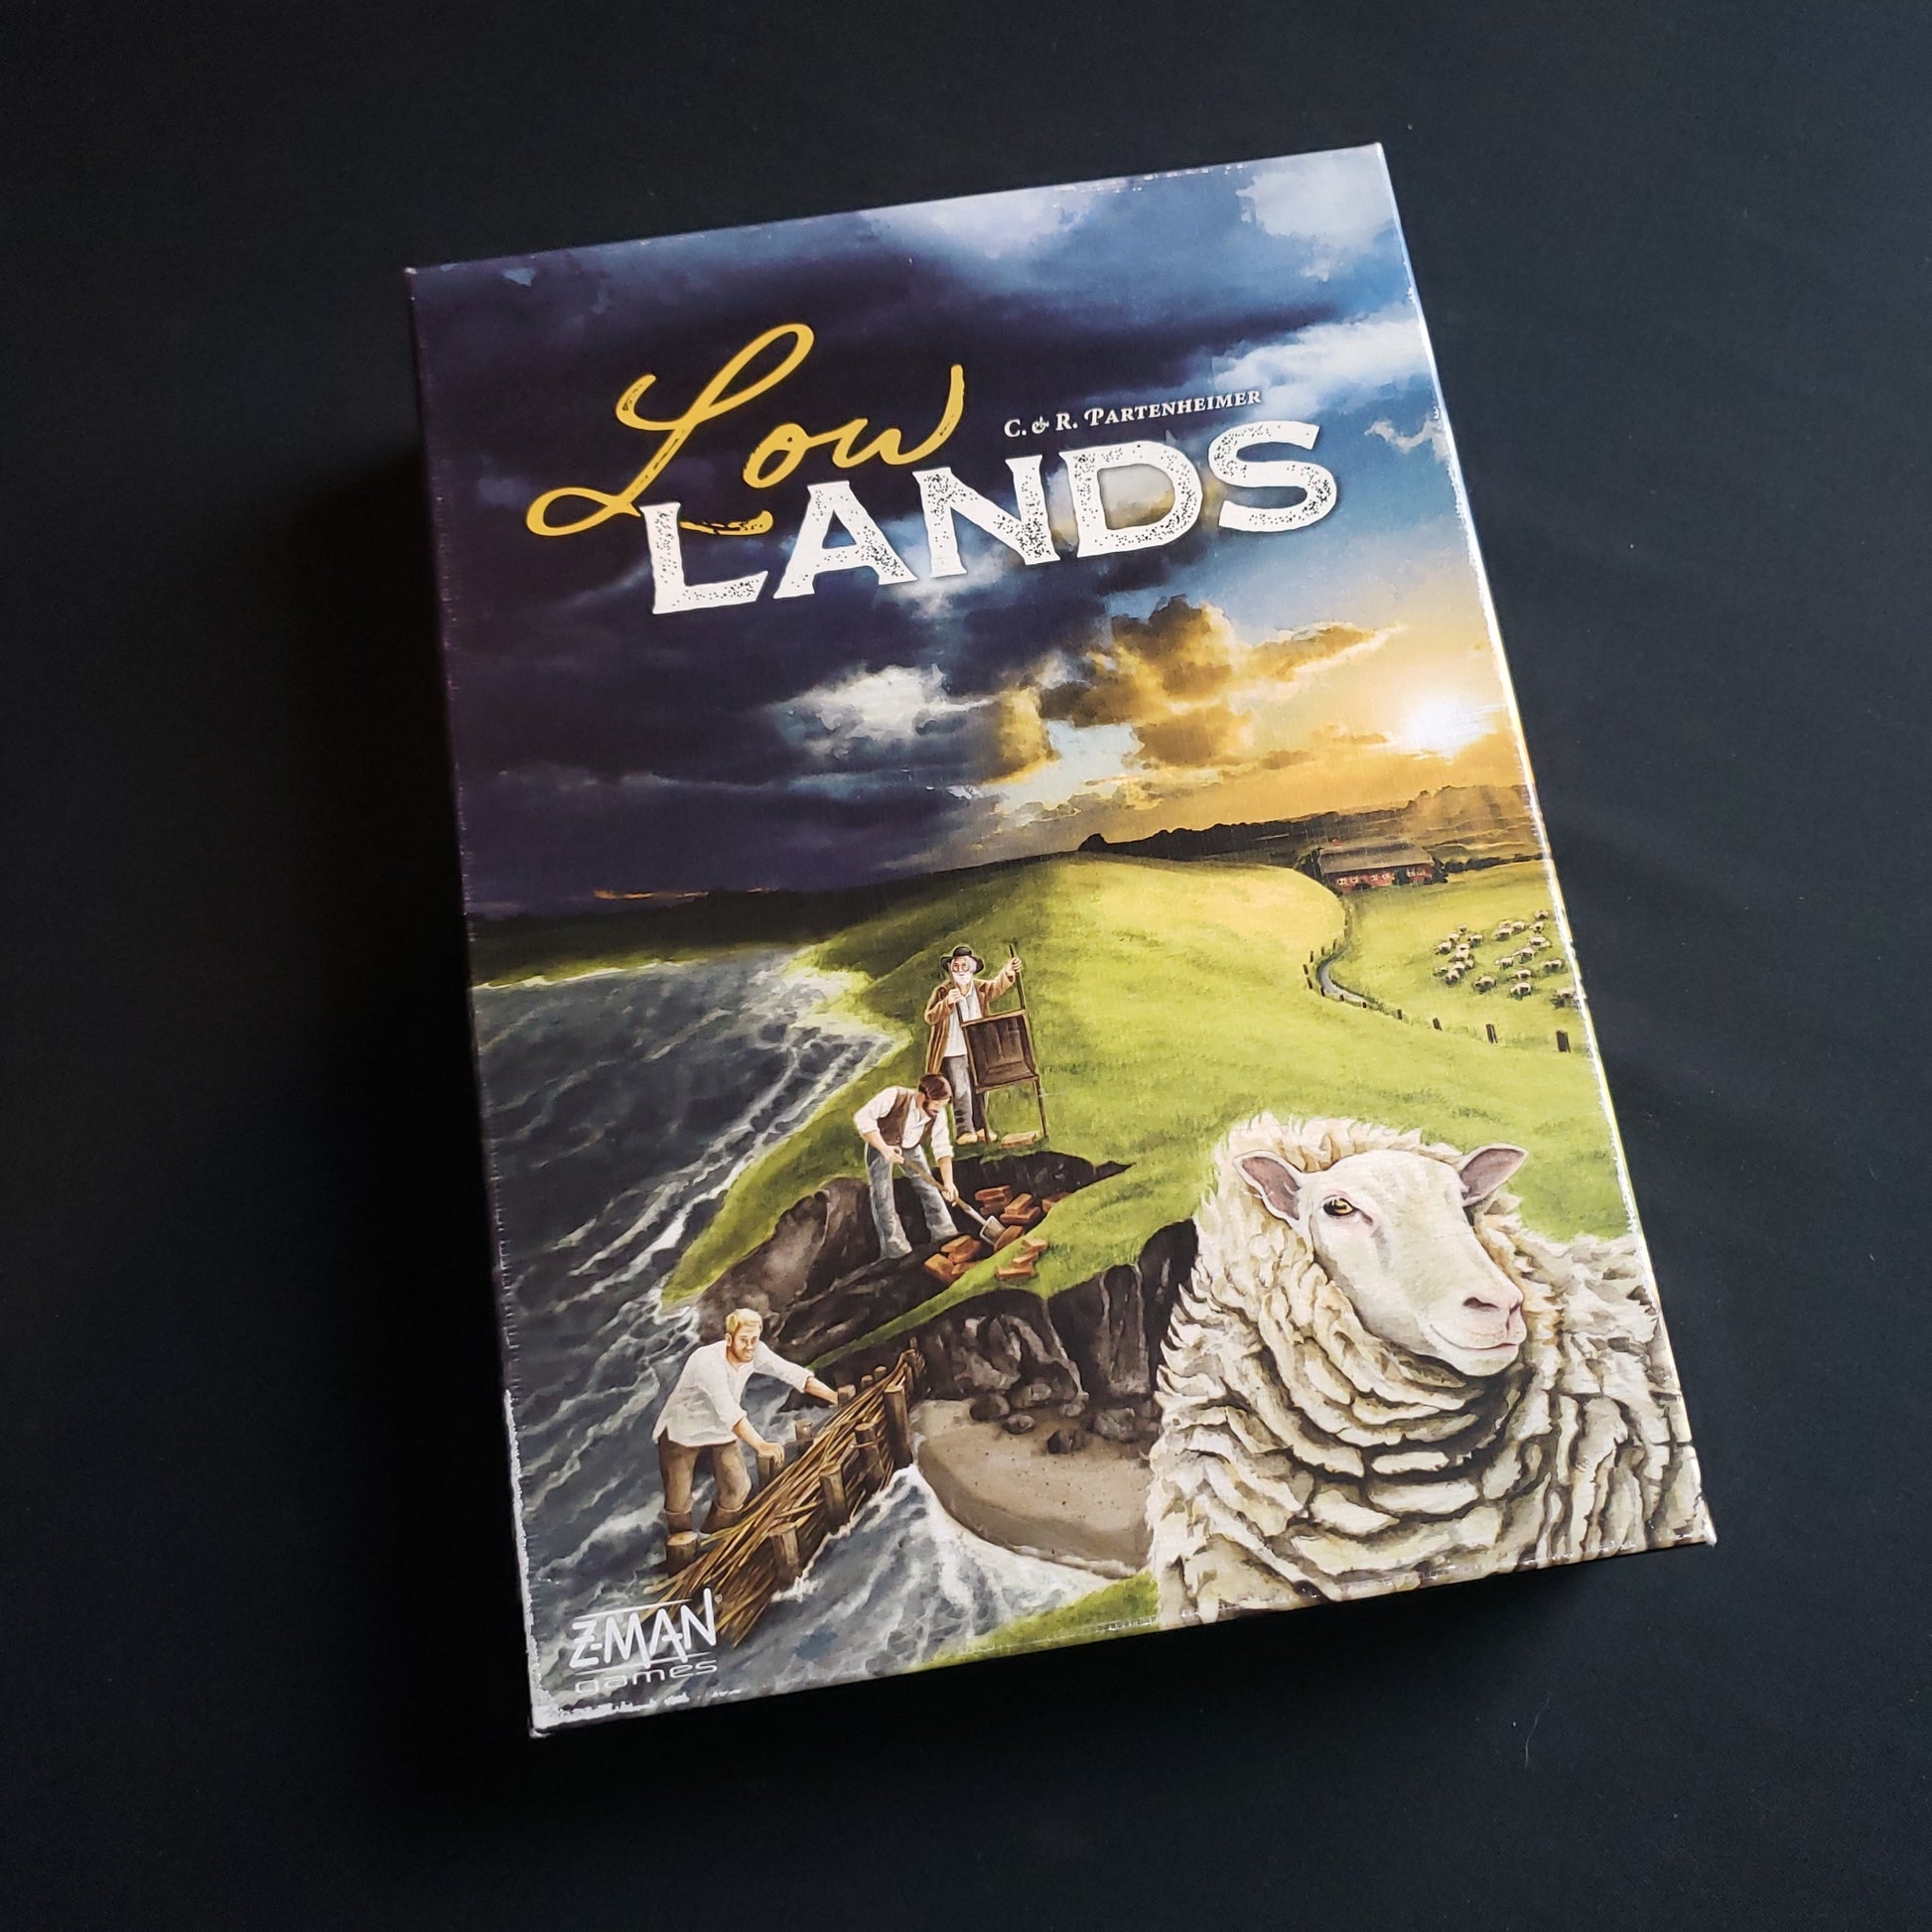 Image shows the front cover of the box of the Lowlands board game